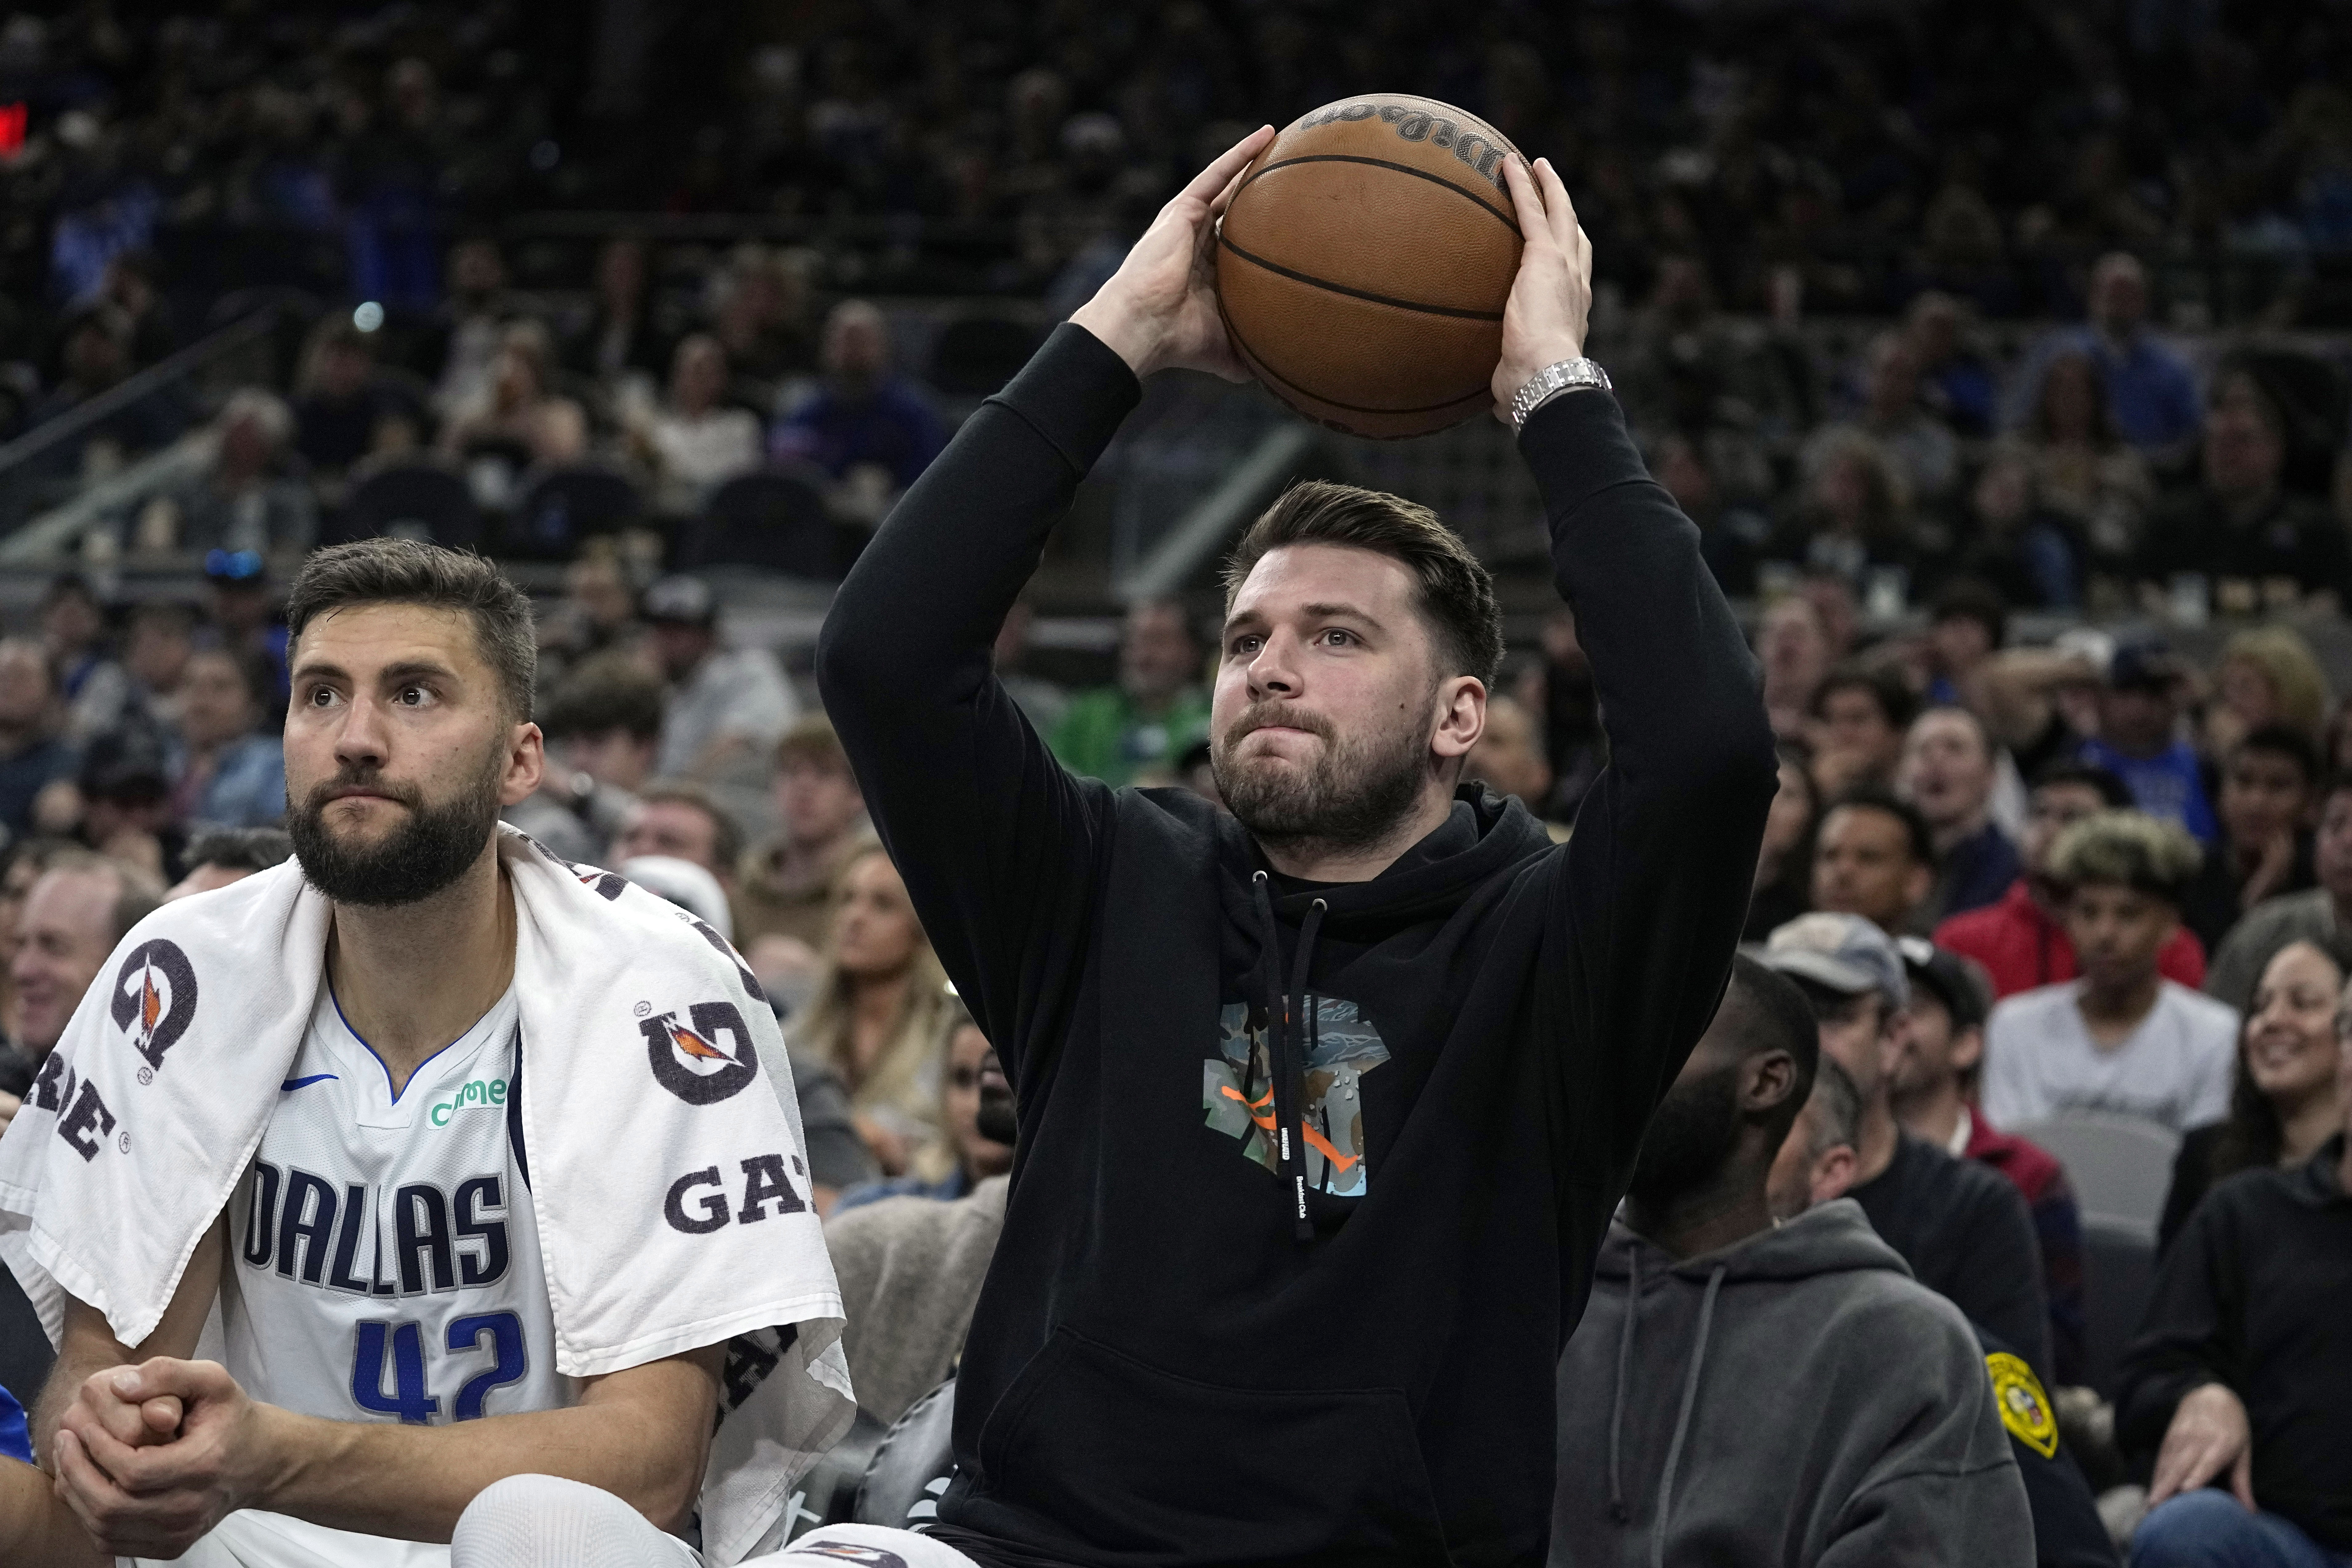 Legend of Luka grows: Doncic takes over late in Mavs win